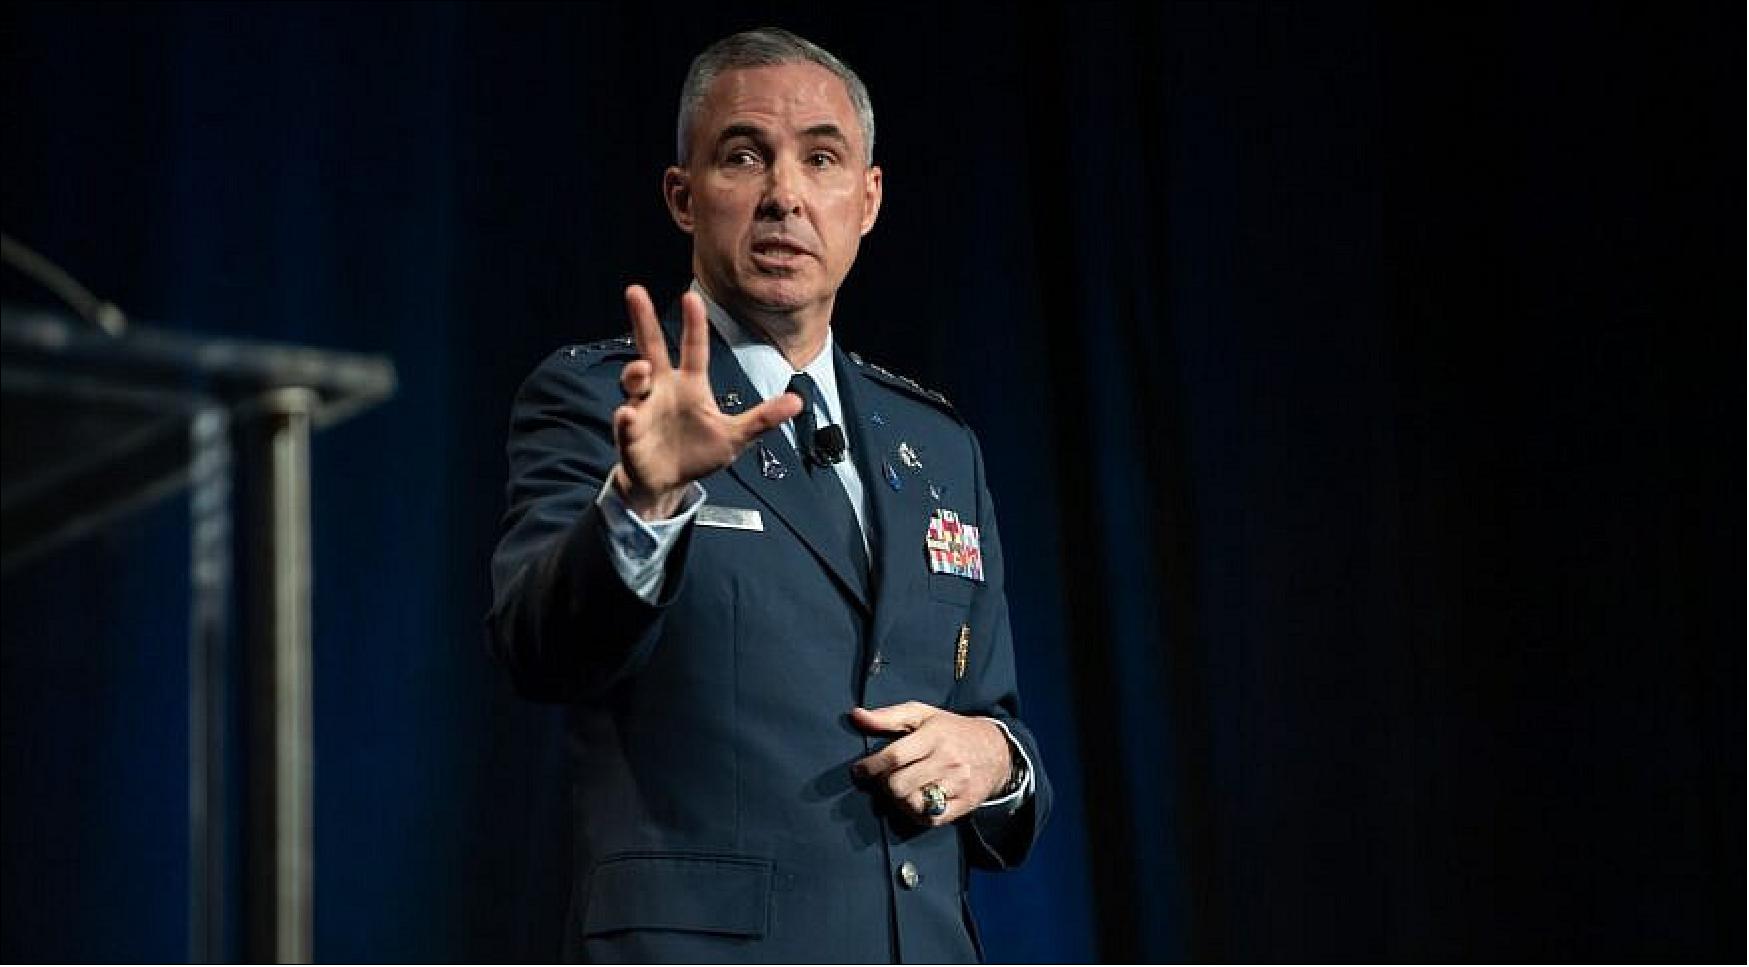 Figure 4: Lt. Gen. Stephen Whiting, commander of the U.S. Space Operations Command, speaks at the 36th Space Symposium in Colorado Springs (image credit: U.S. Space Command)